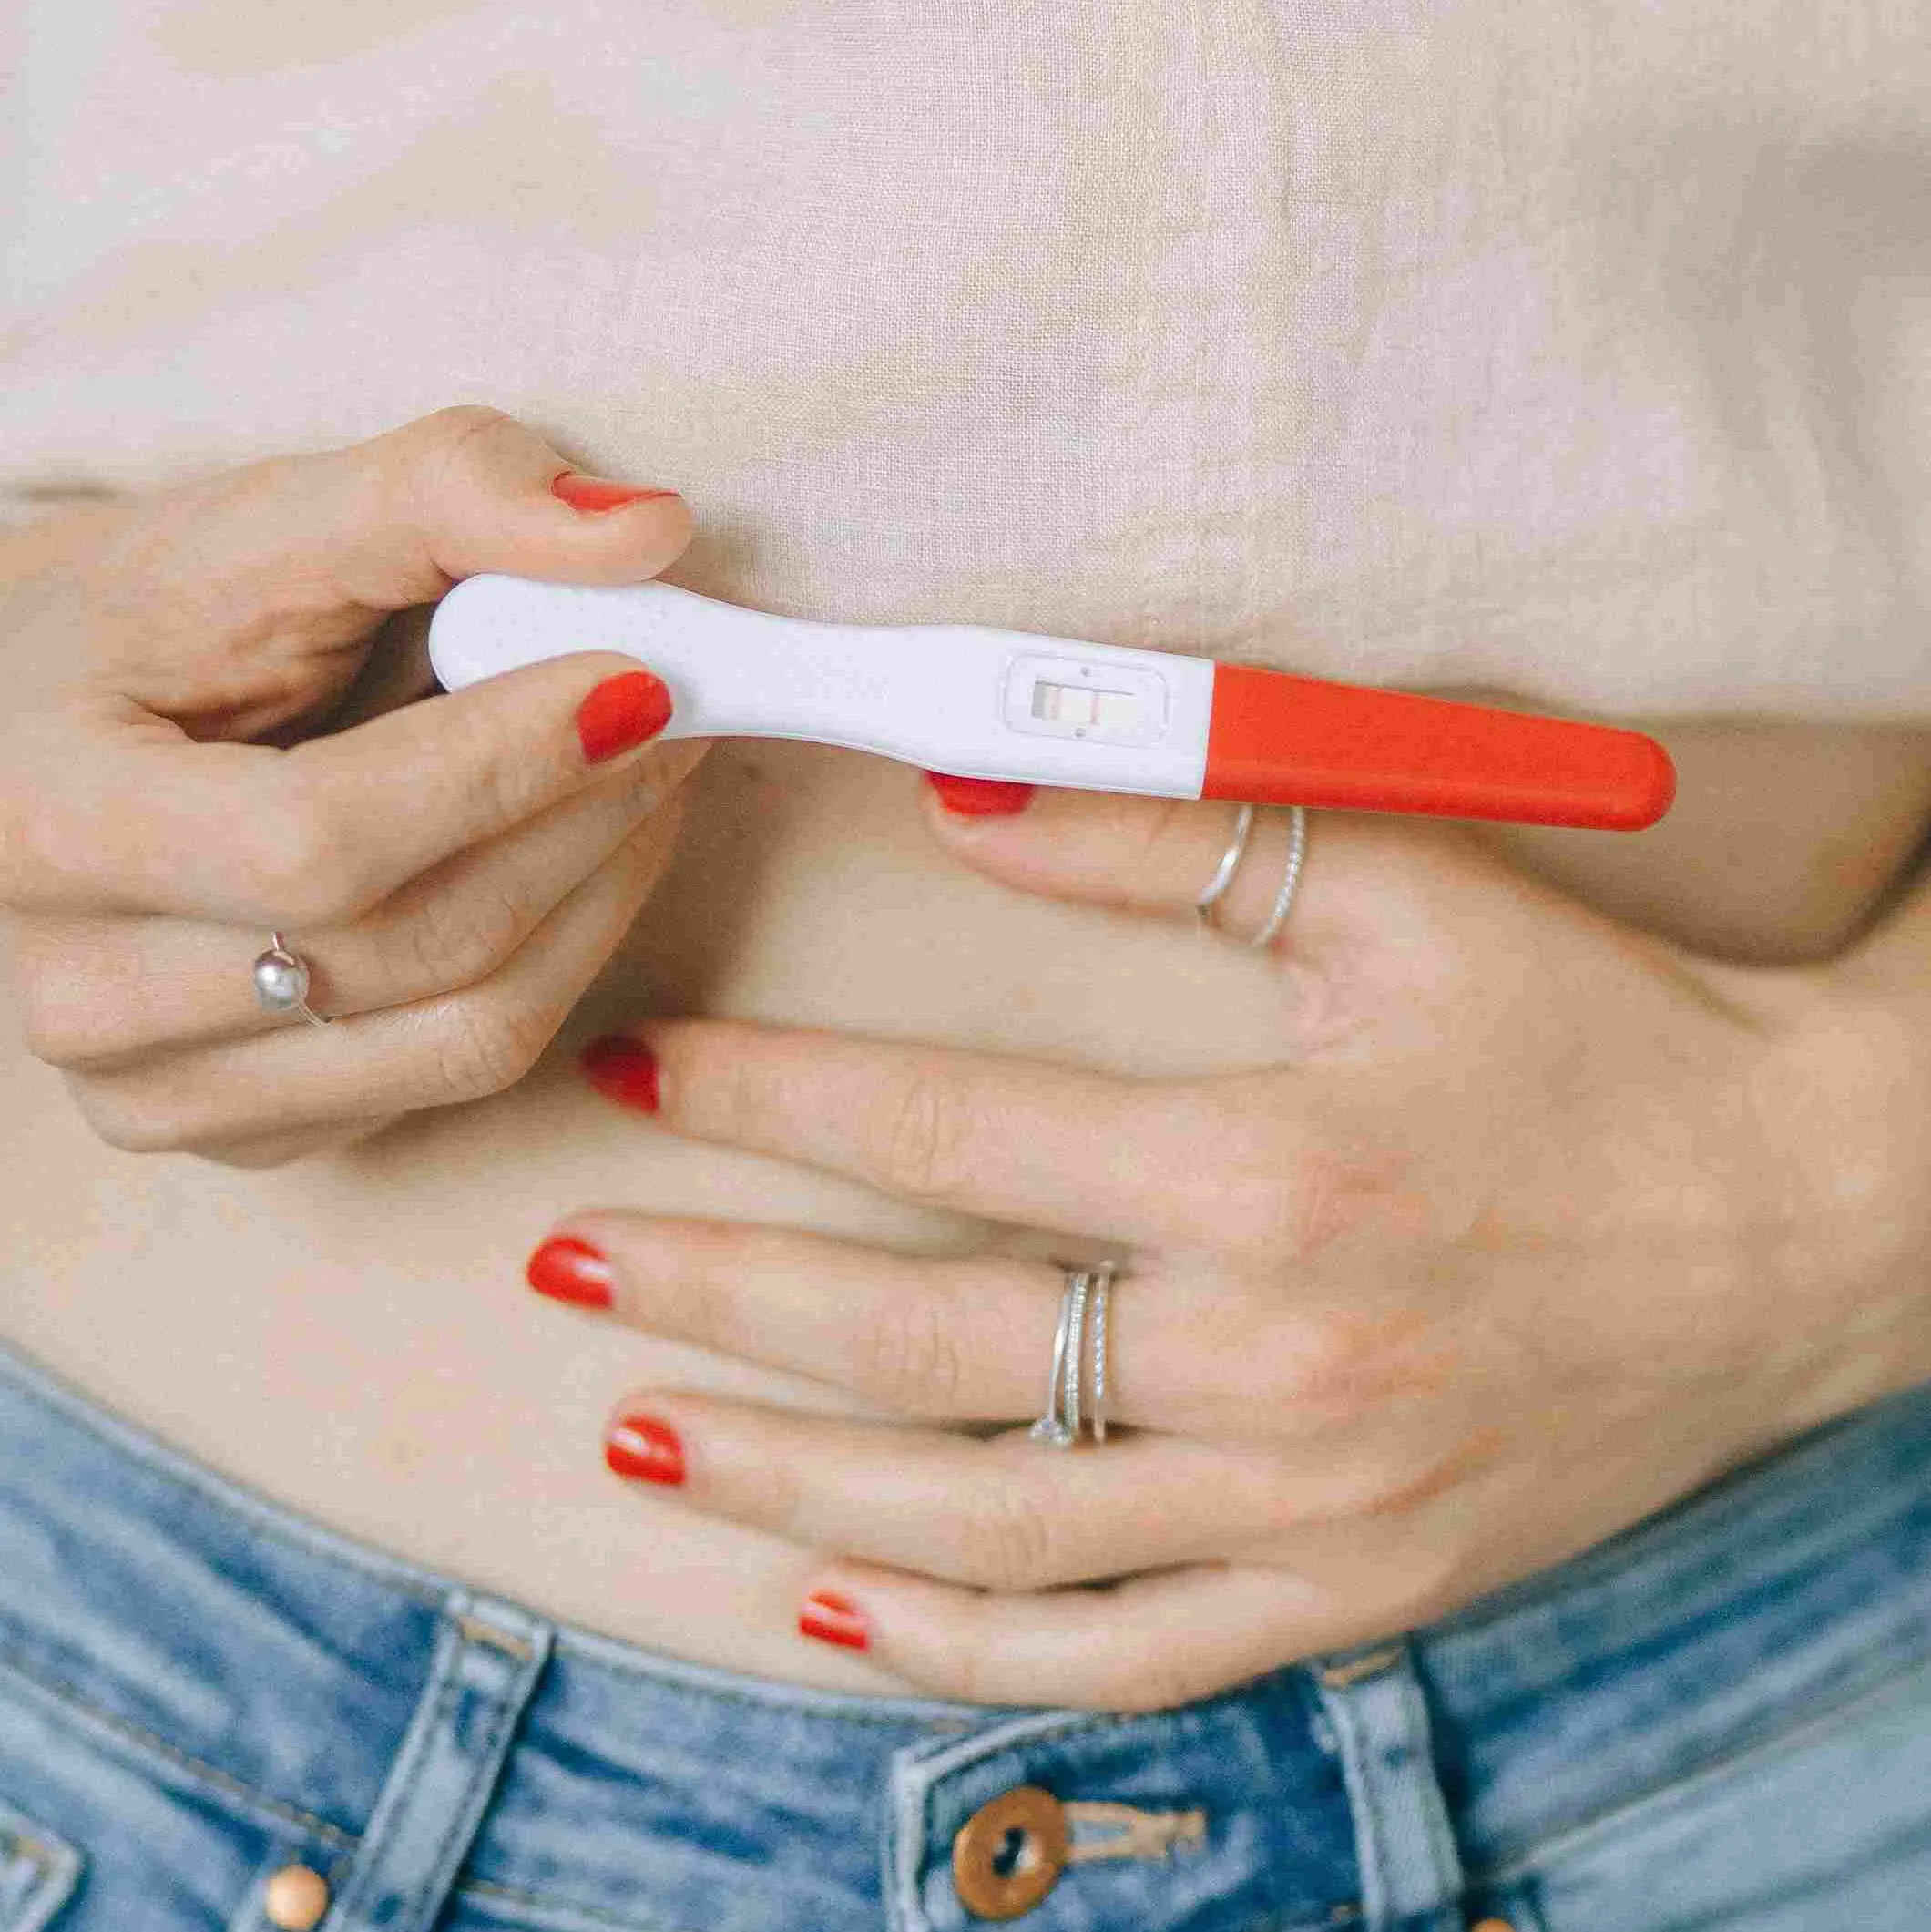 How soon are pregnancy tests accurate